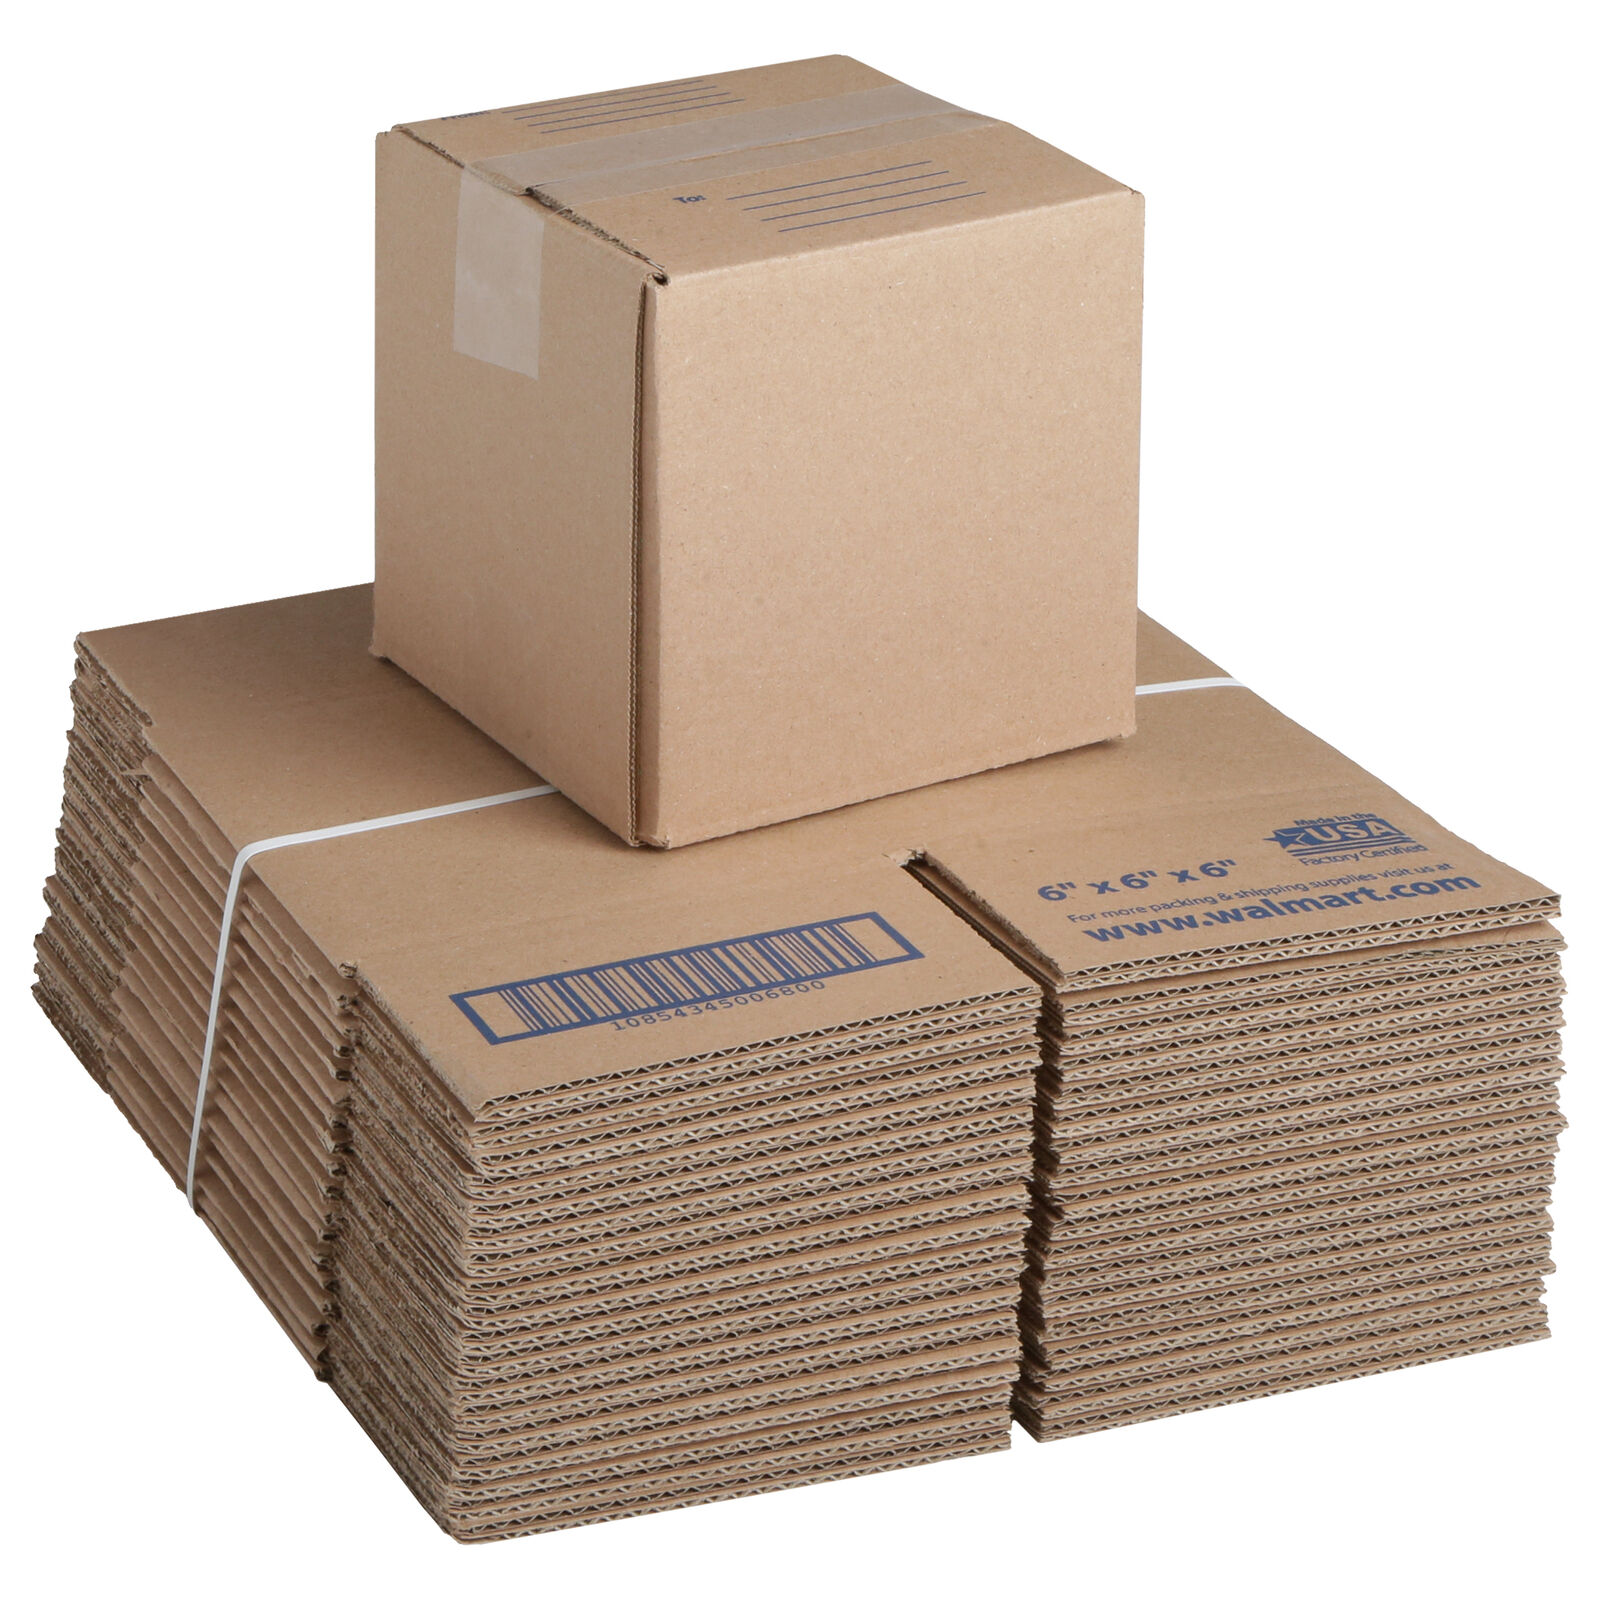 30pcs 6x6x6 Cardboard Paper Boxes Mailing Packing Shipping Box 0.5 lb Recycle